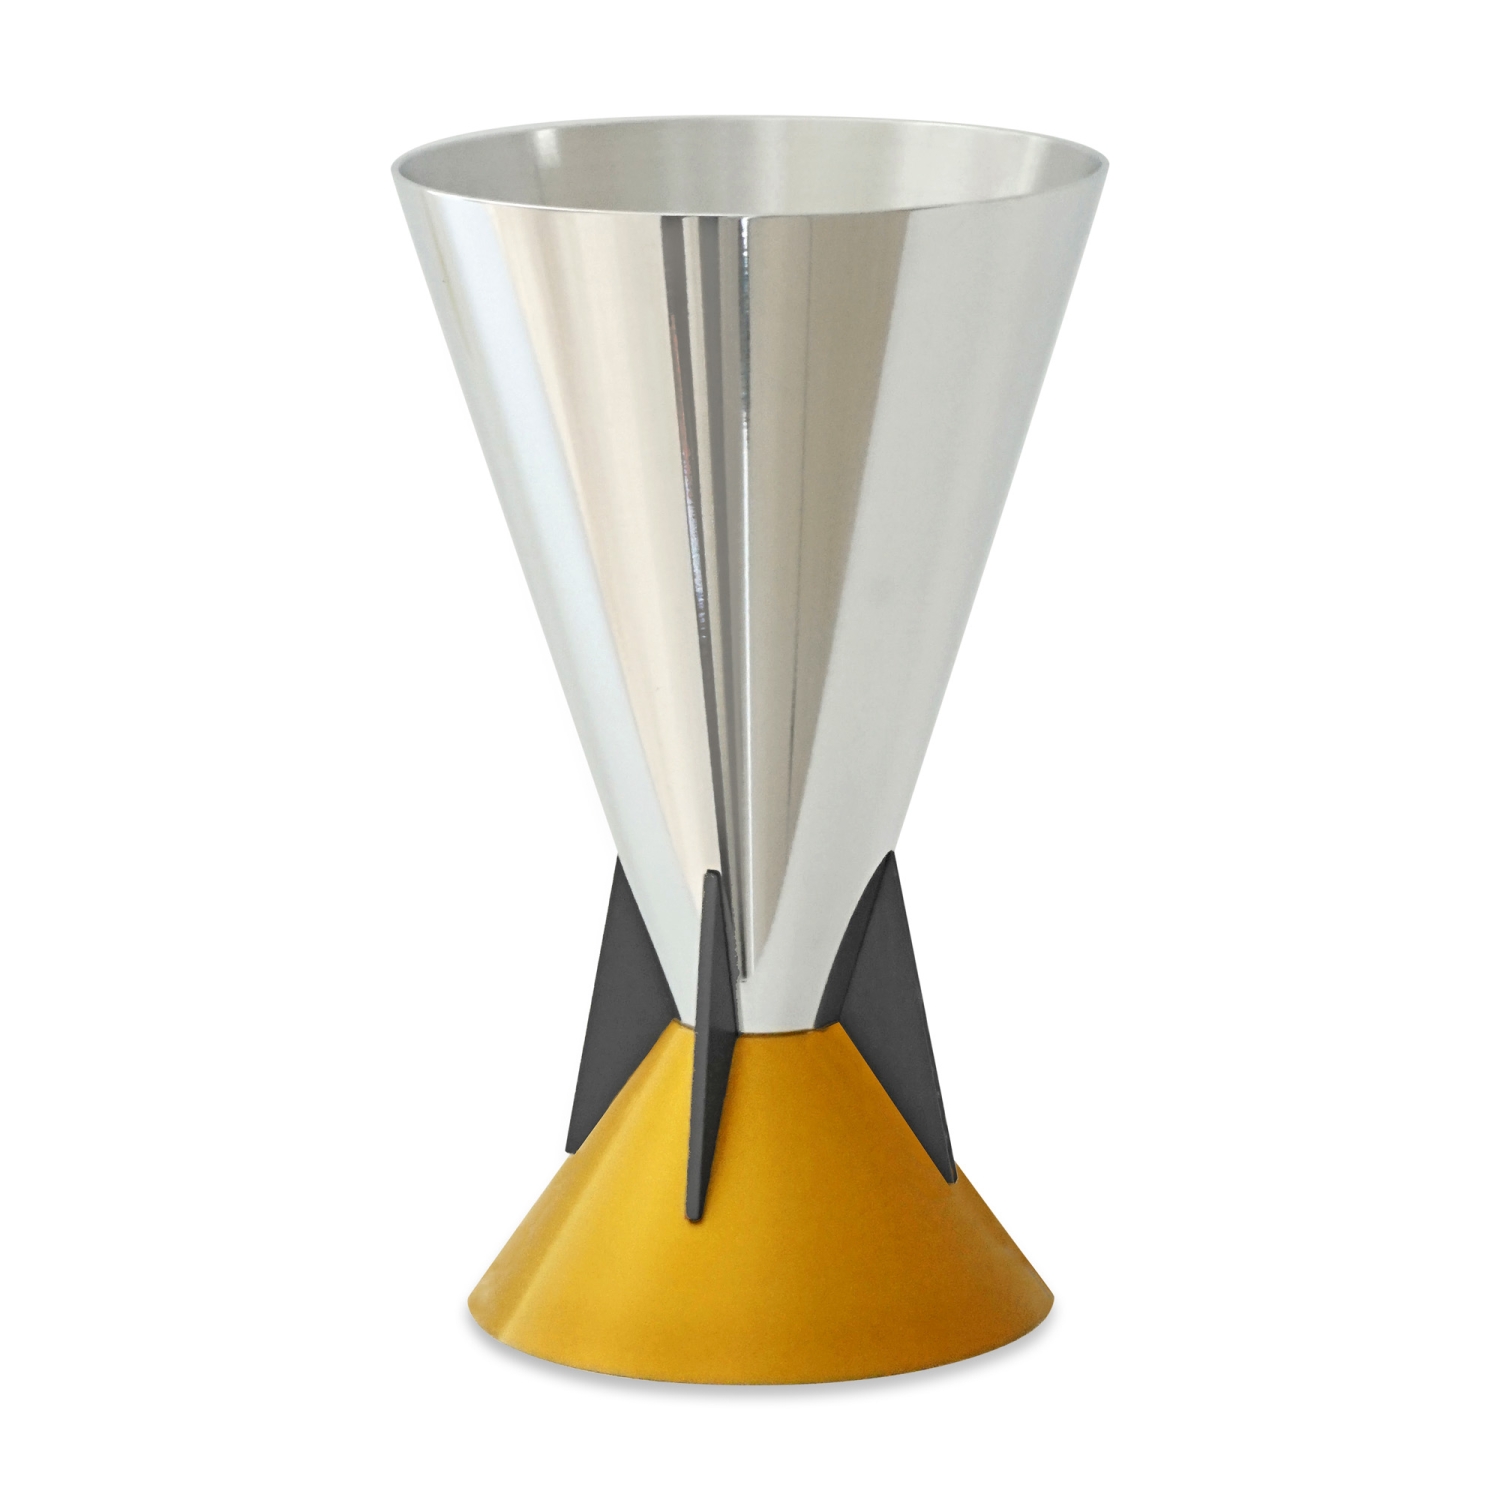 Caesarea Arts Wings Collection Kiddush Cup – Gray and Yellow - 1